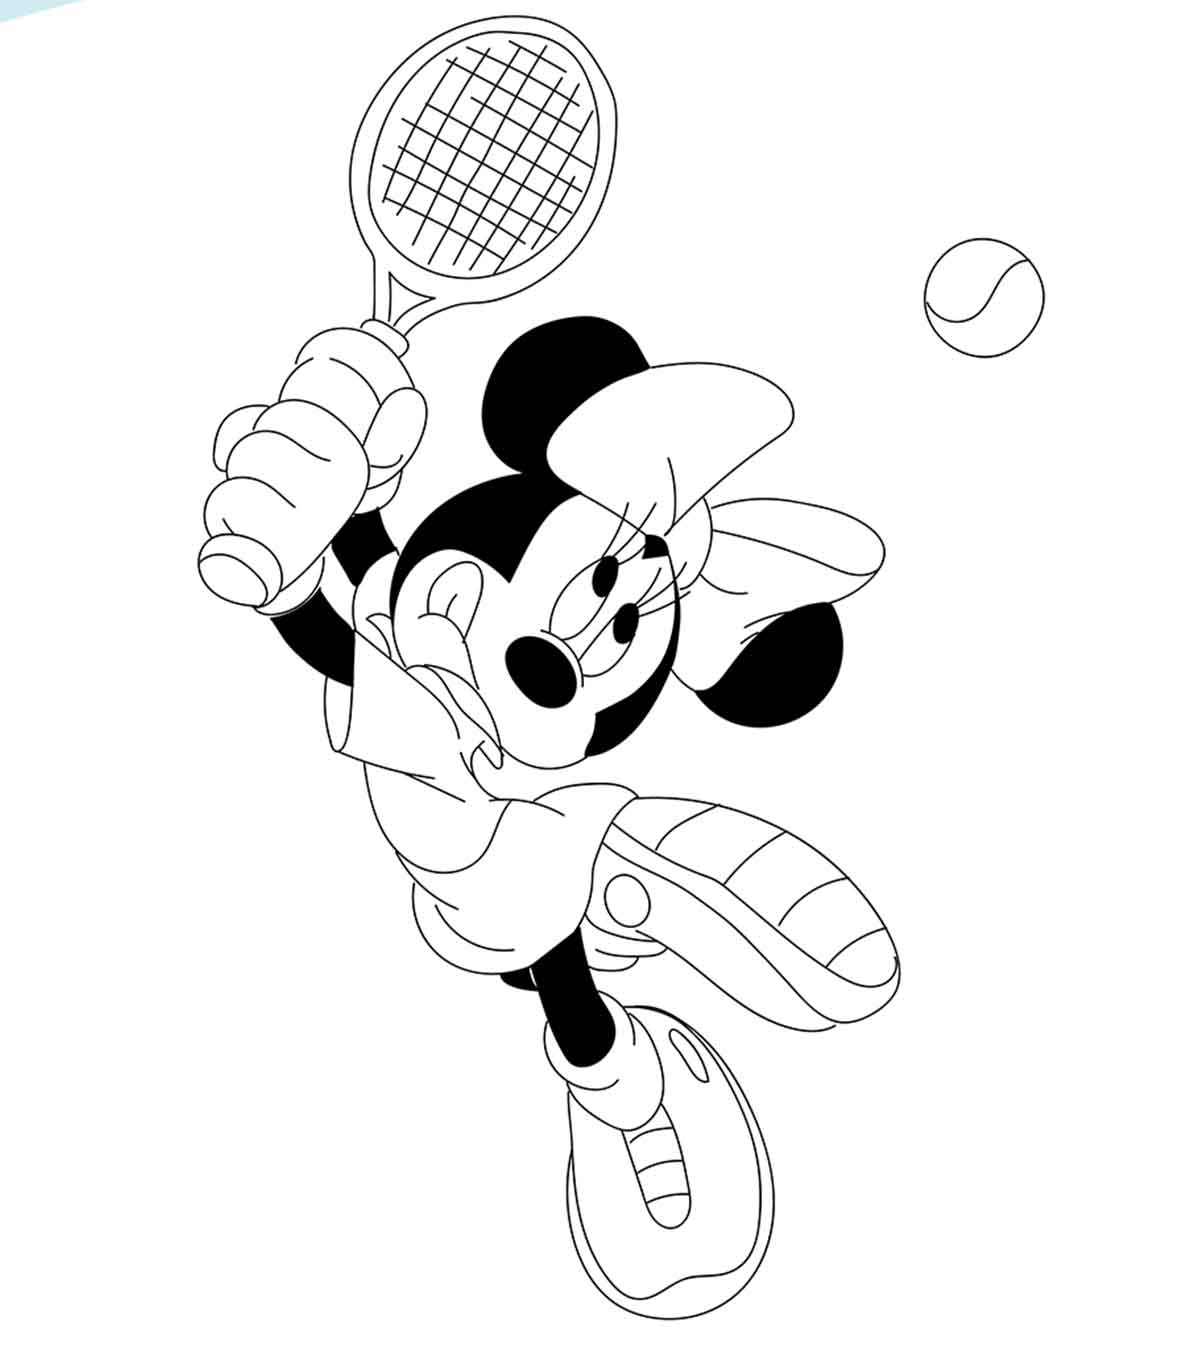 25 Best Tennis Coloring Pages Your Toddler Will Love To Color